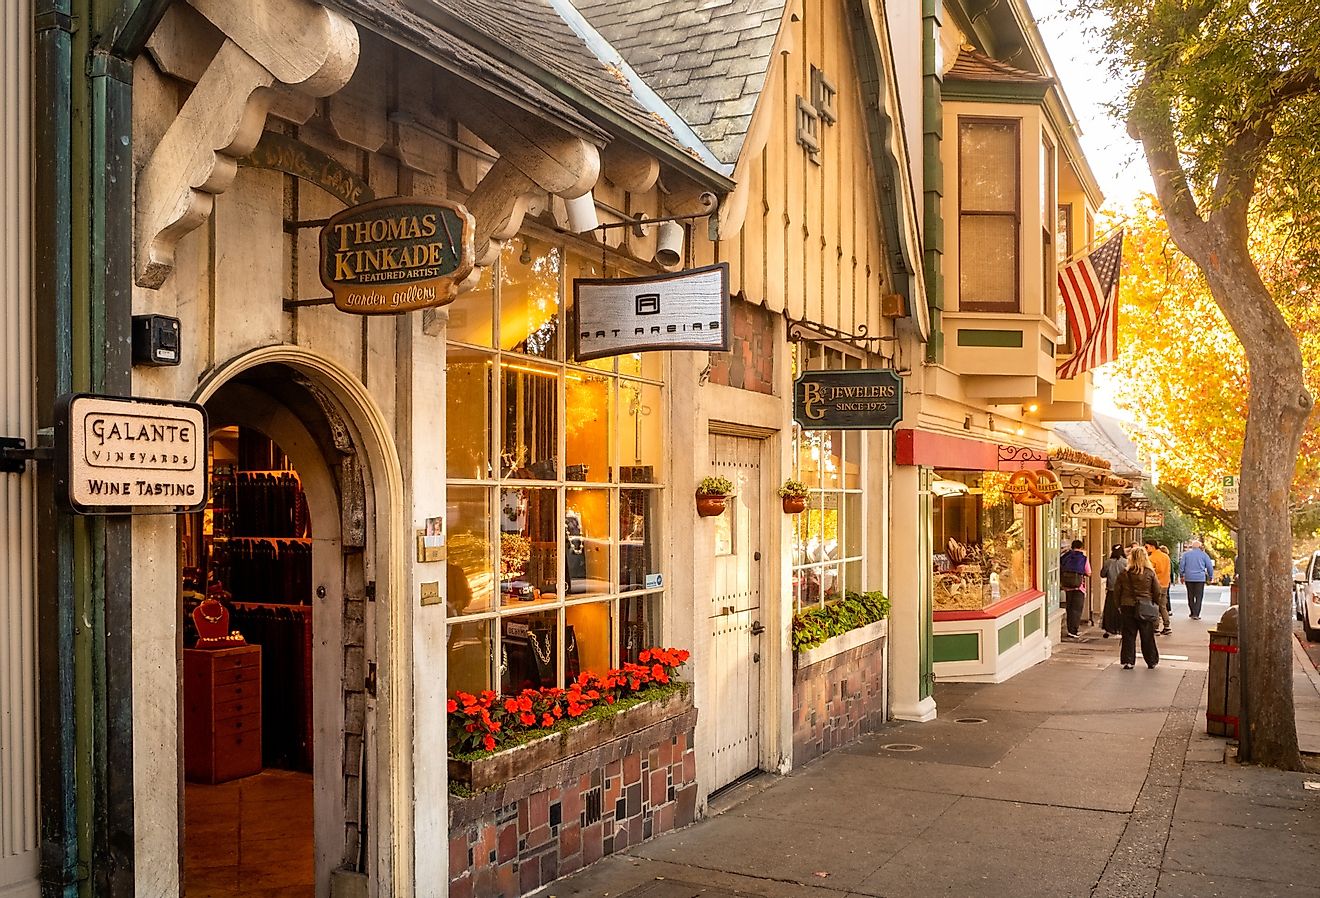 Small boutique stores along the sidewalk in Carmel by the Sea, California. Image credit Robert Mullan via Shutterstock